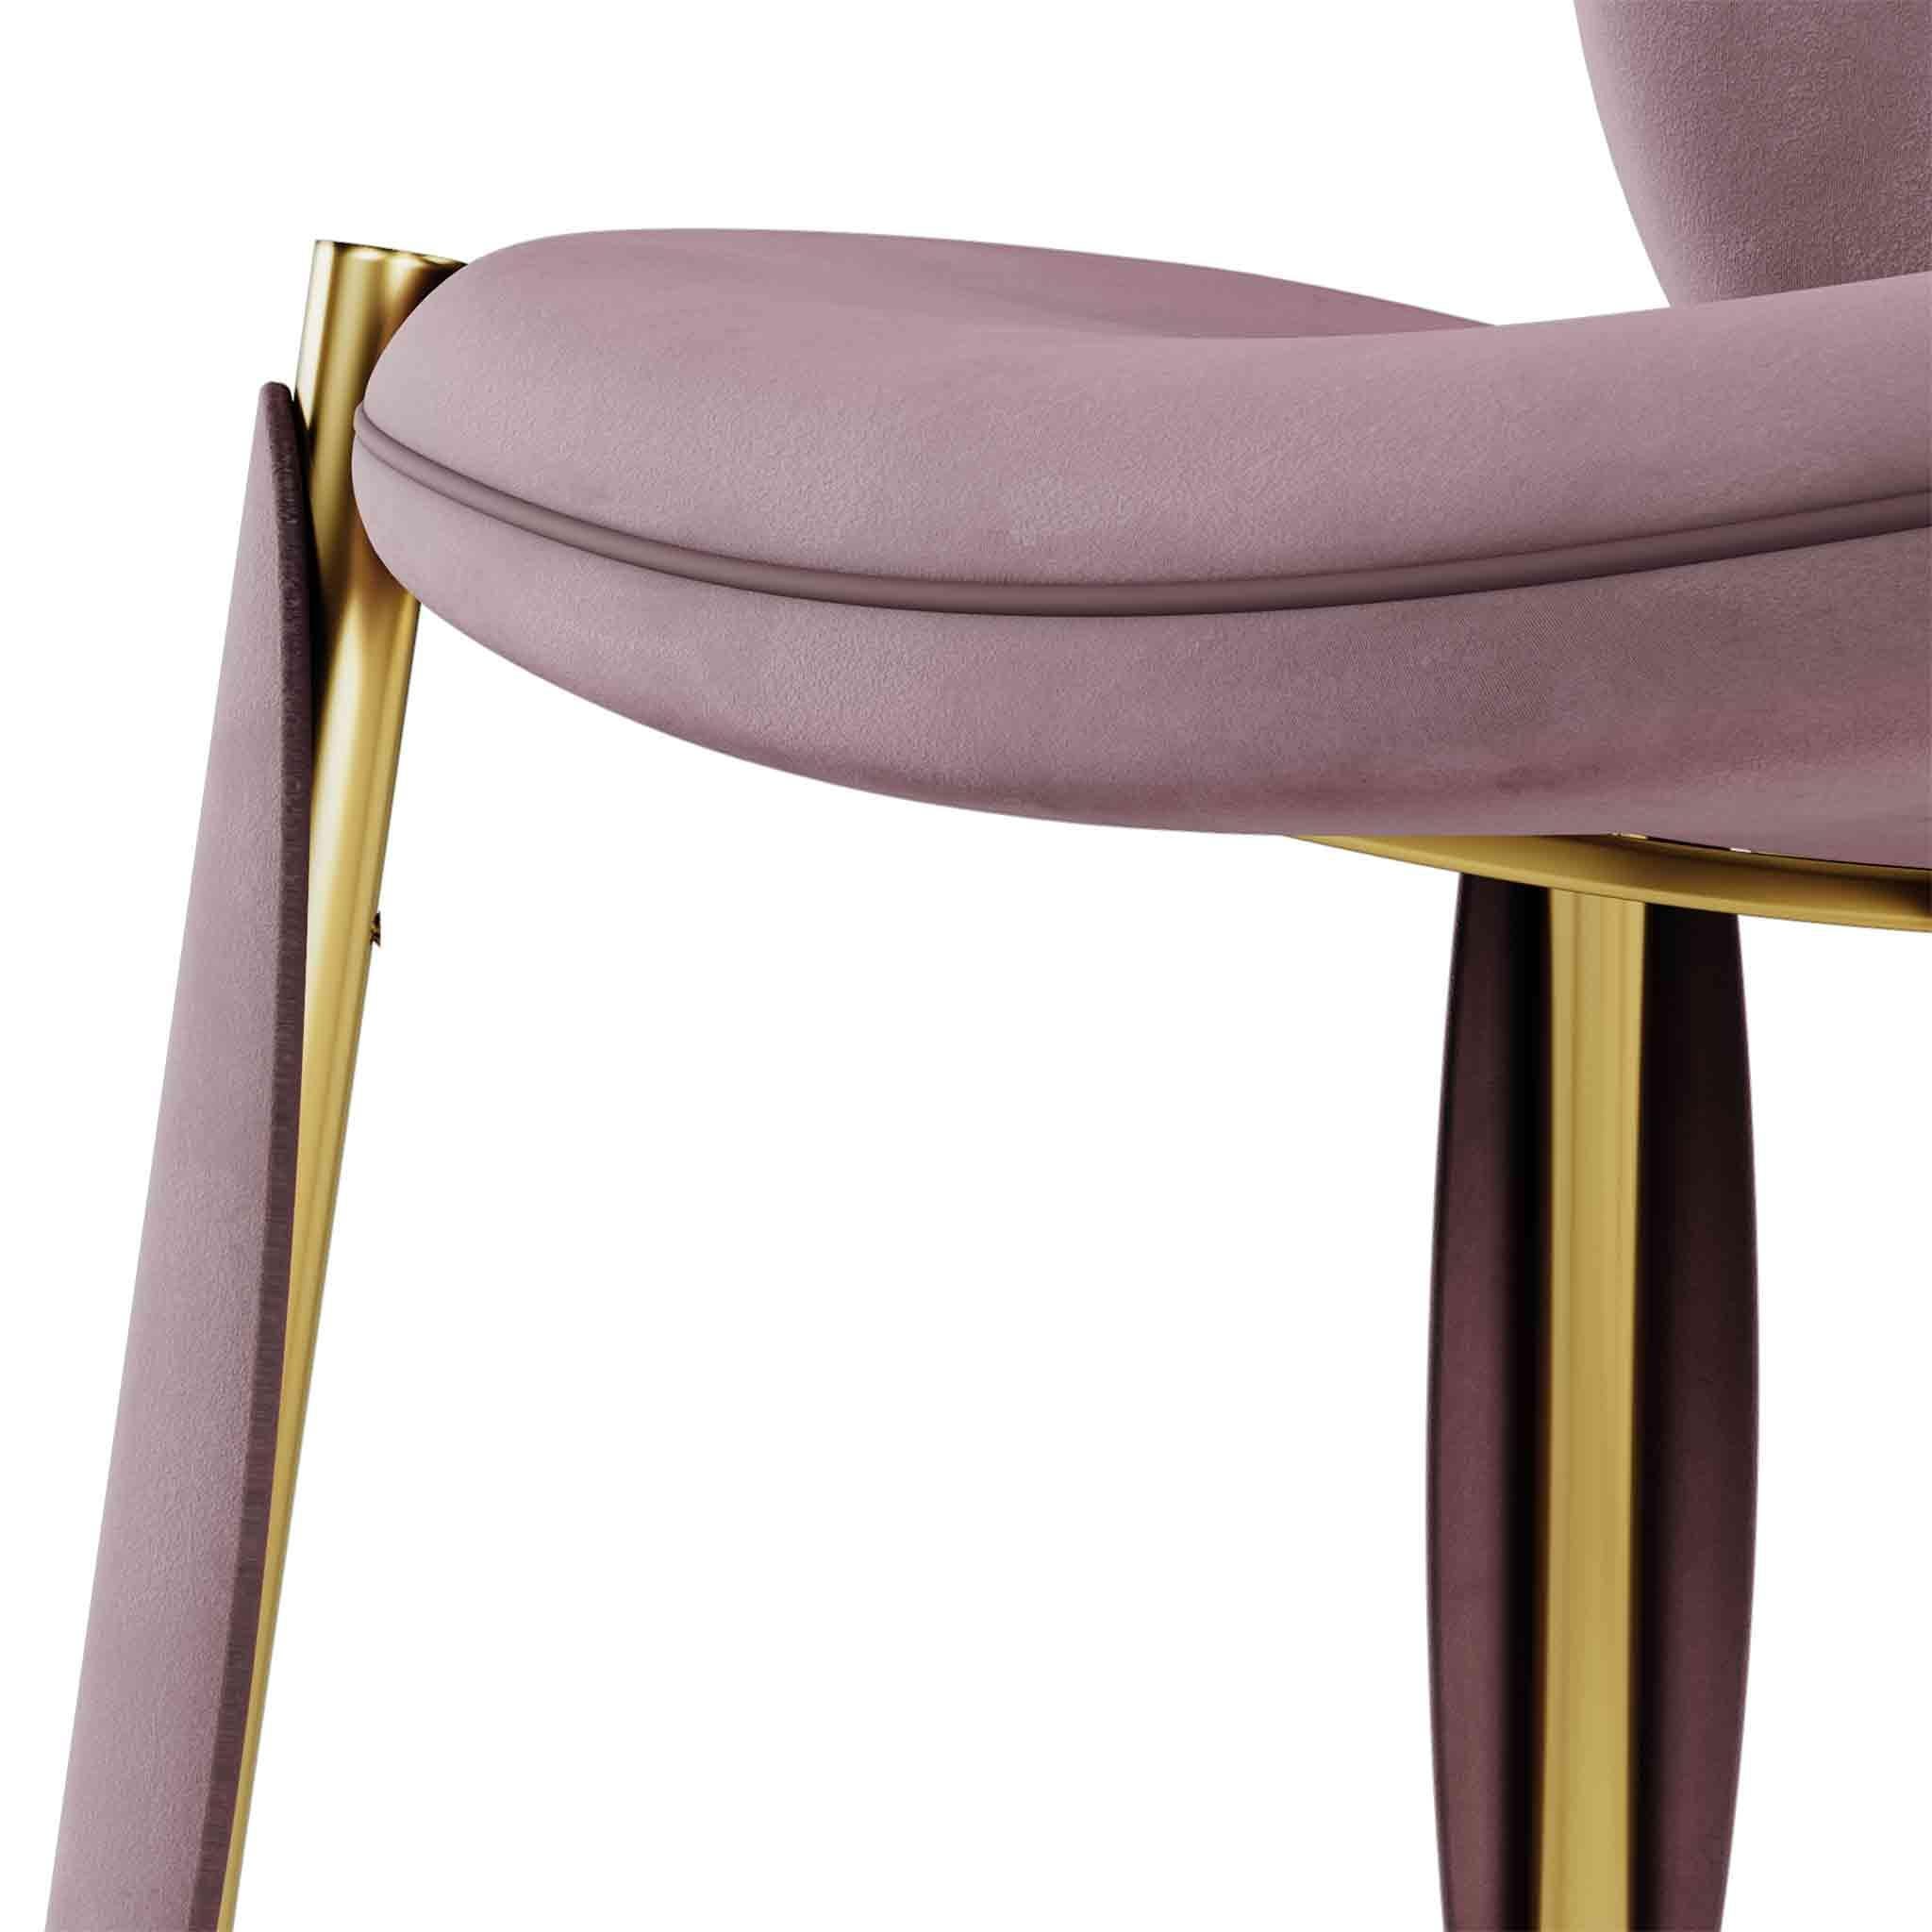 Portuguese Contemporary Minimal Pink Velvet Dining Chair with Polished Brass Structure For Sale